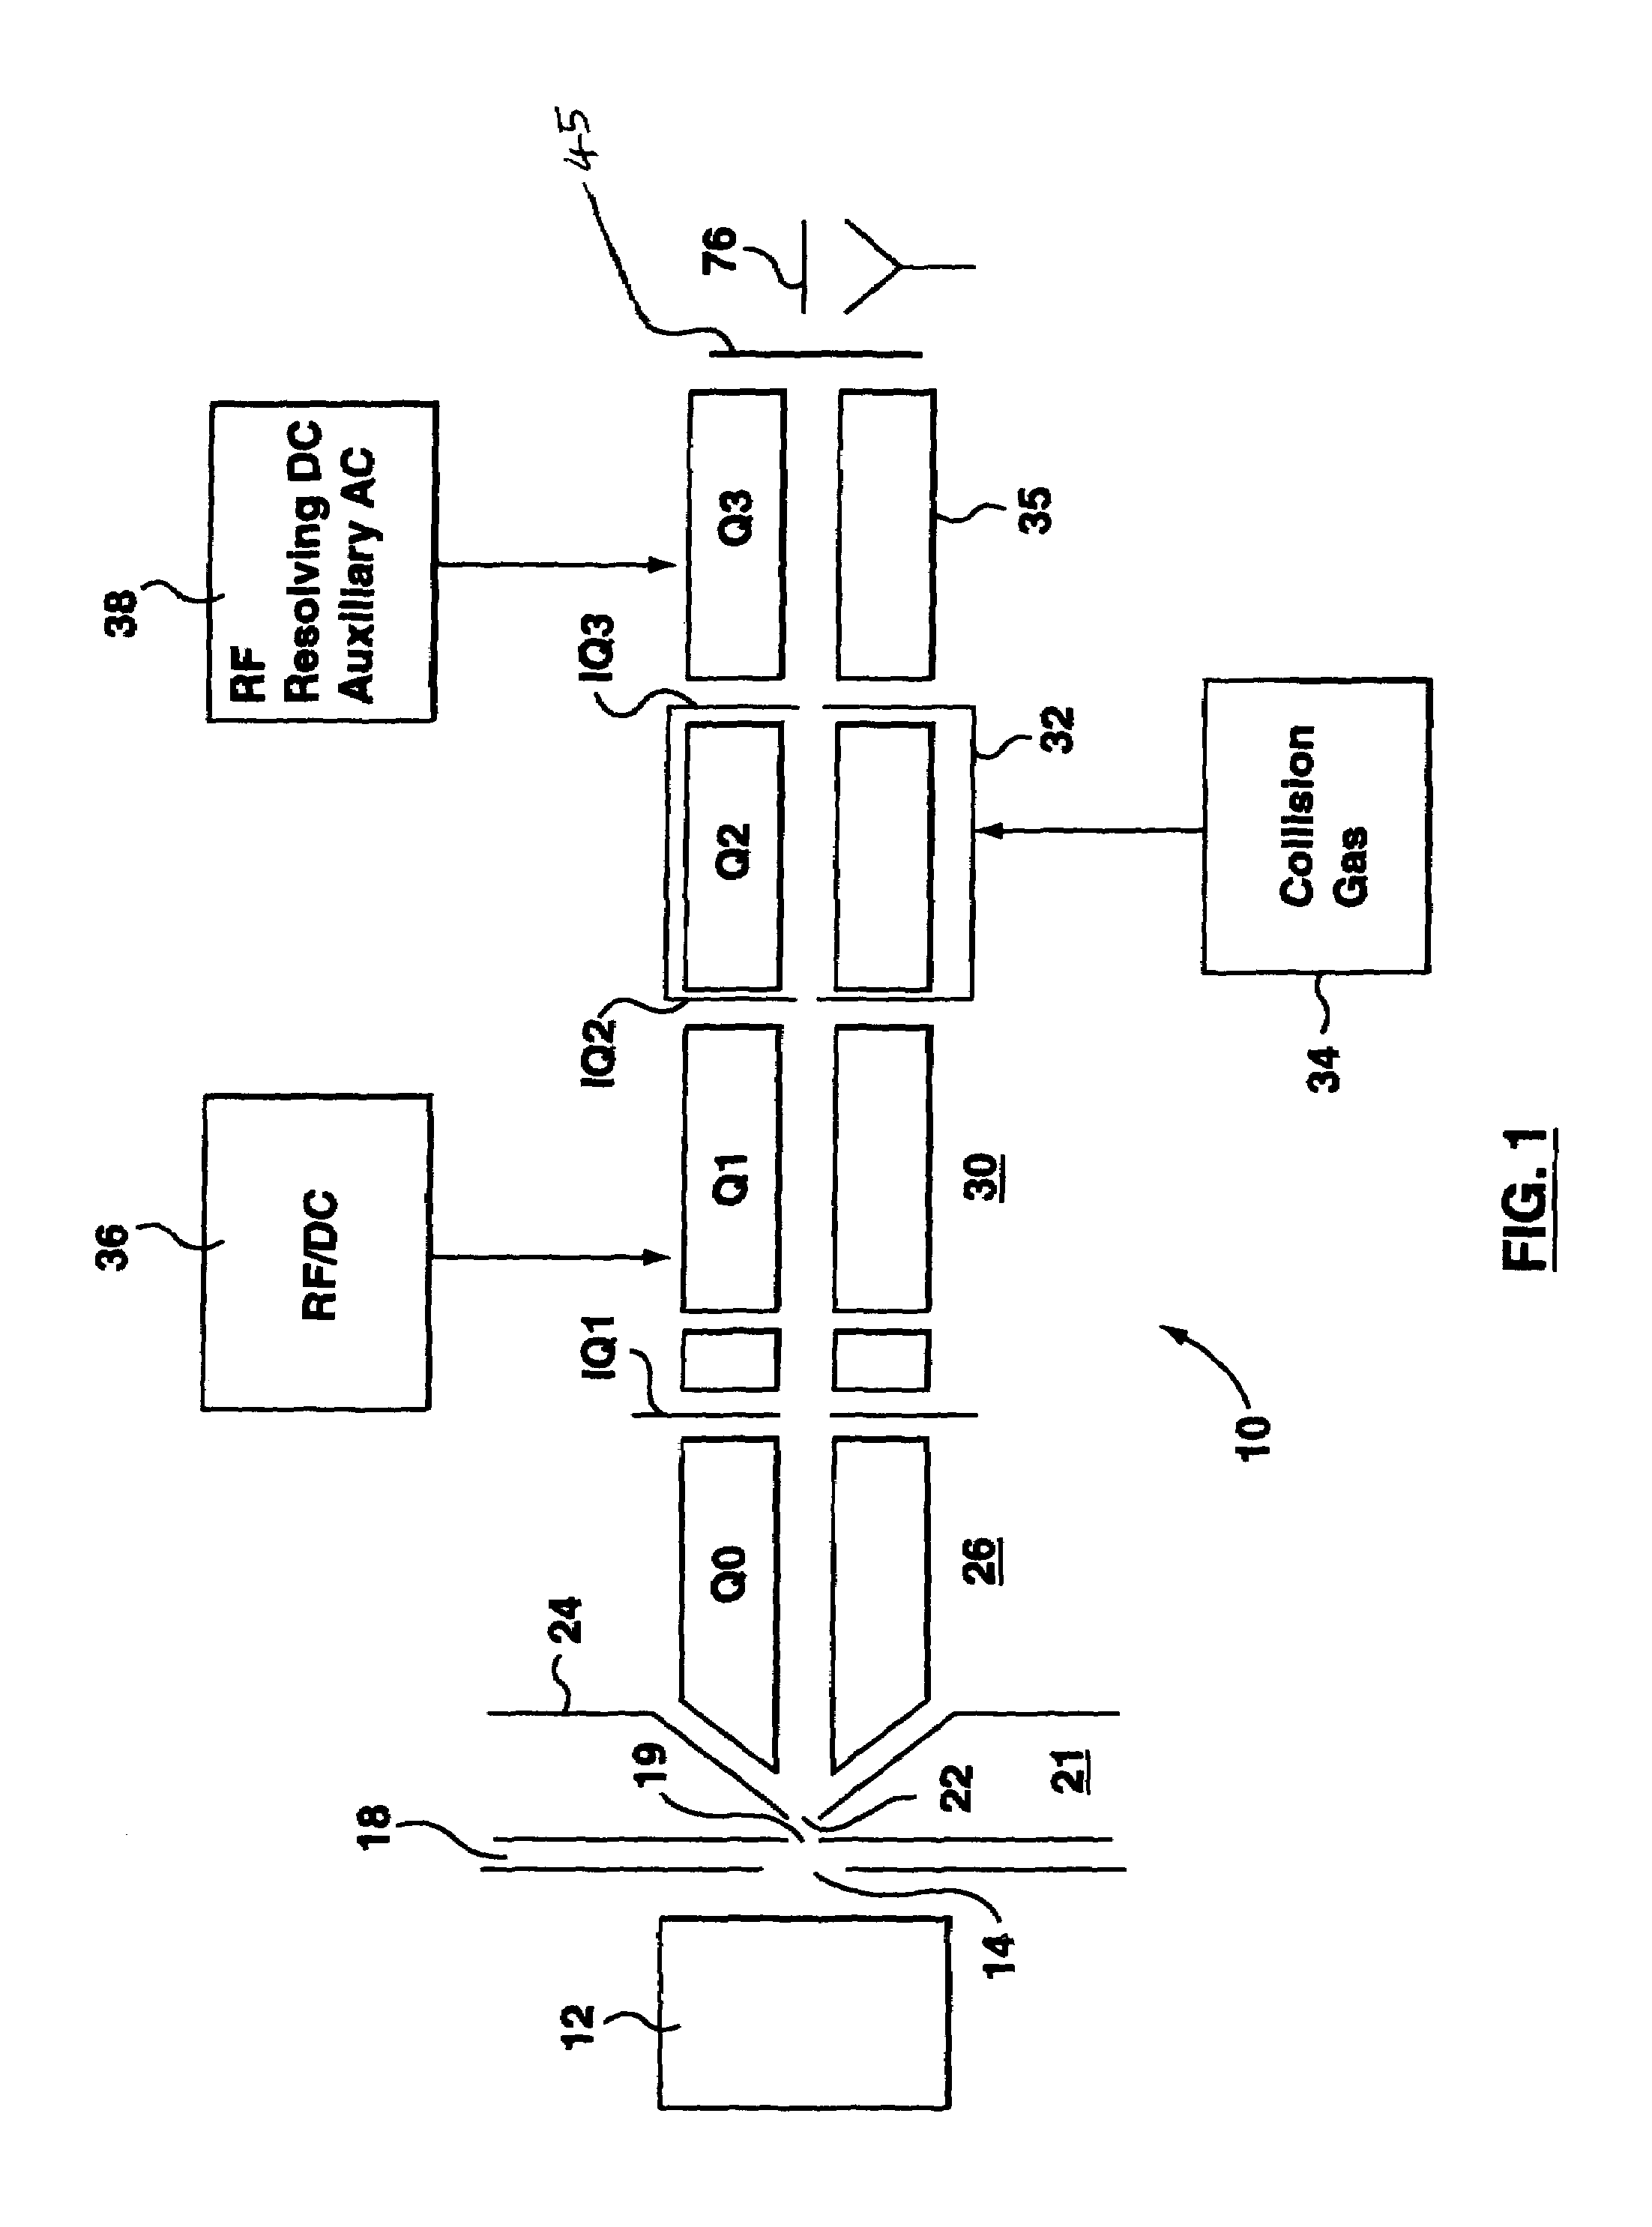 Triple quadrupole mass spectrometer with capability to perform multiple mass analysis steps